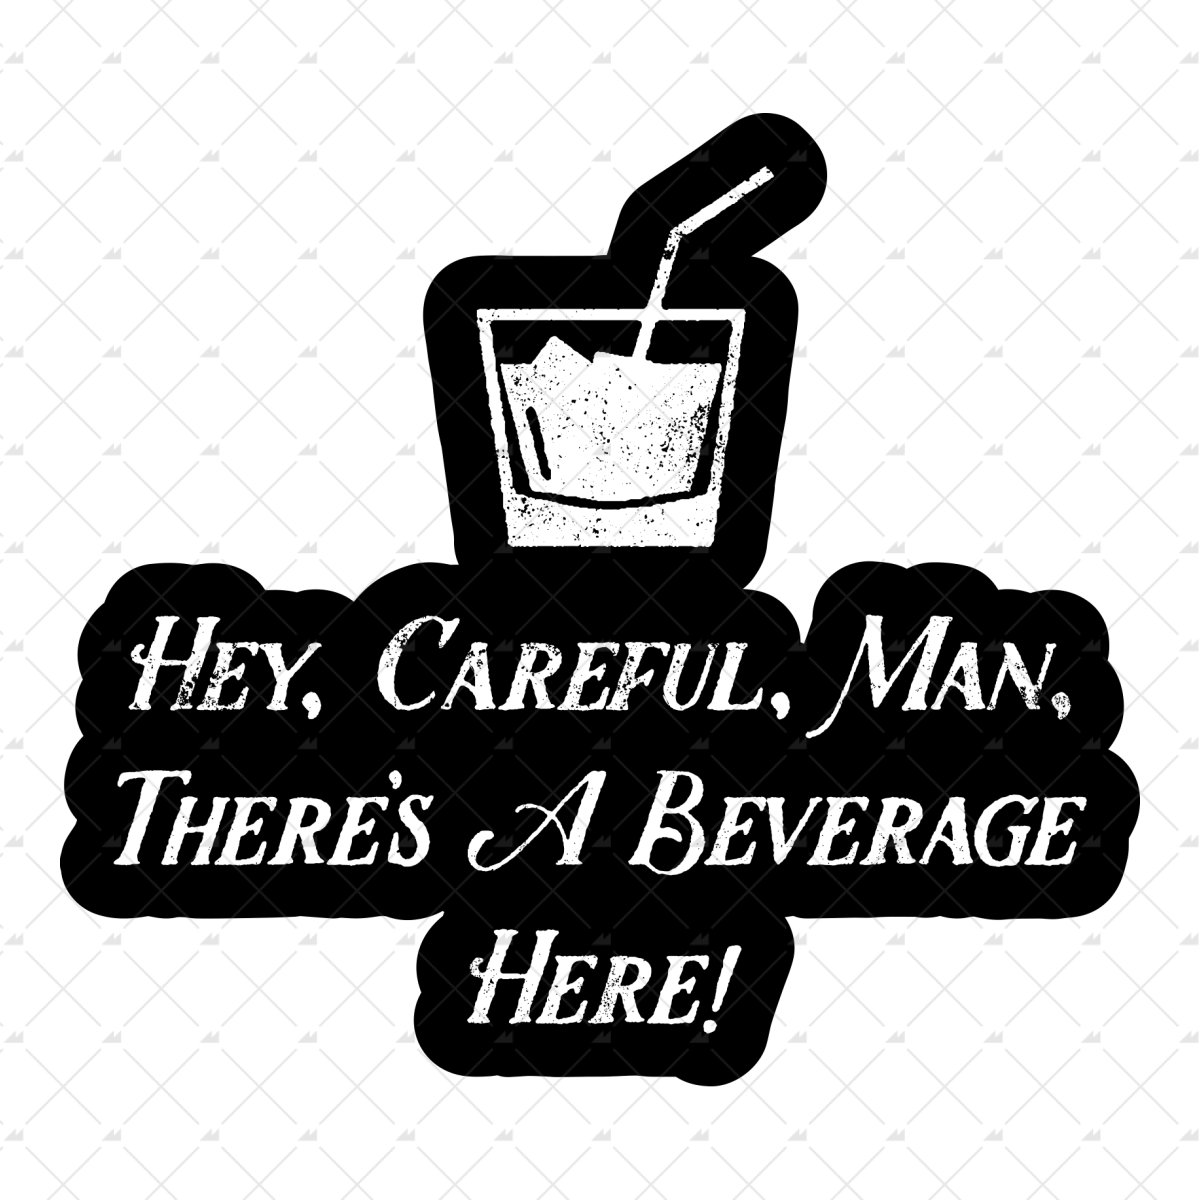 Hey Careful Man There's a Beverage Here - Sticker